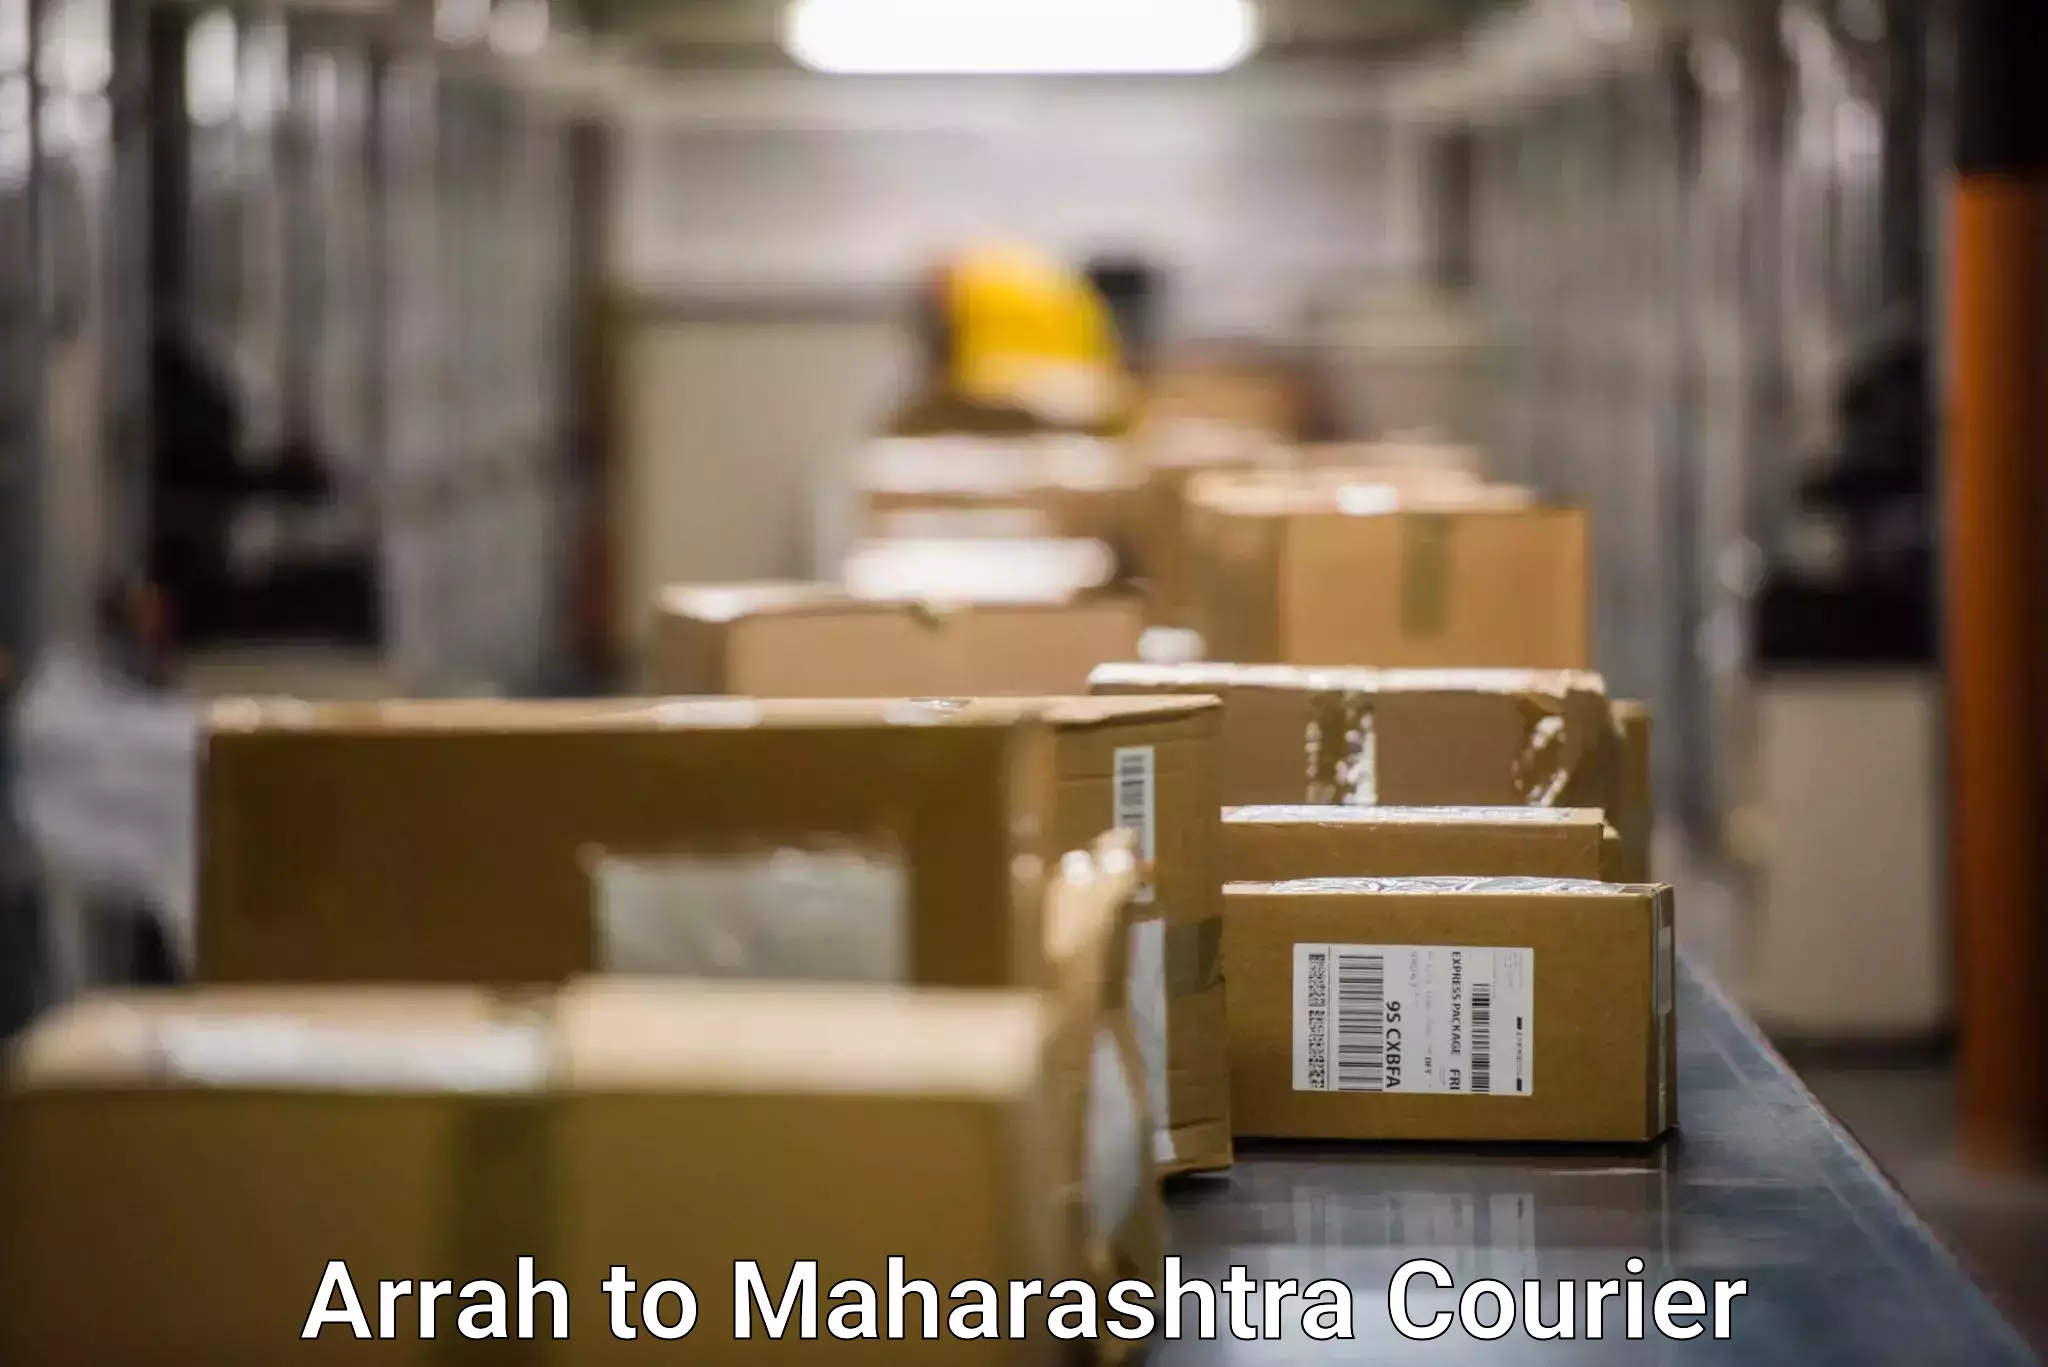 End-to-end delivery Arrah to Maharashtra